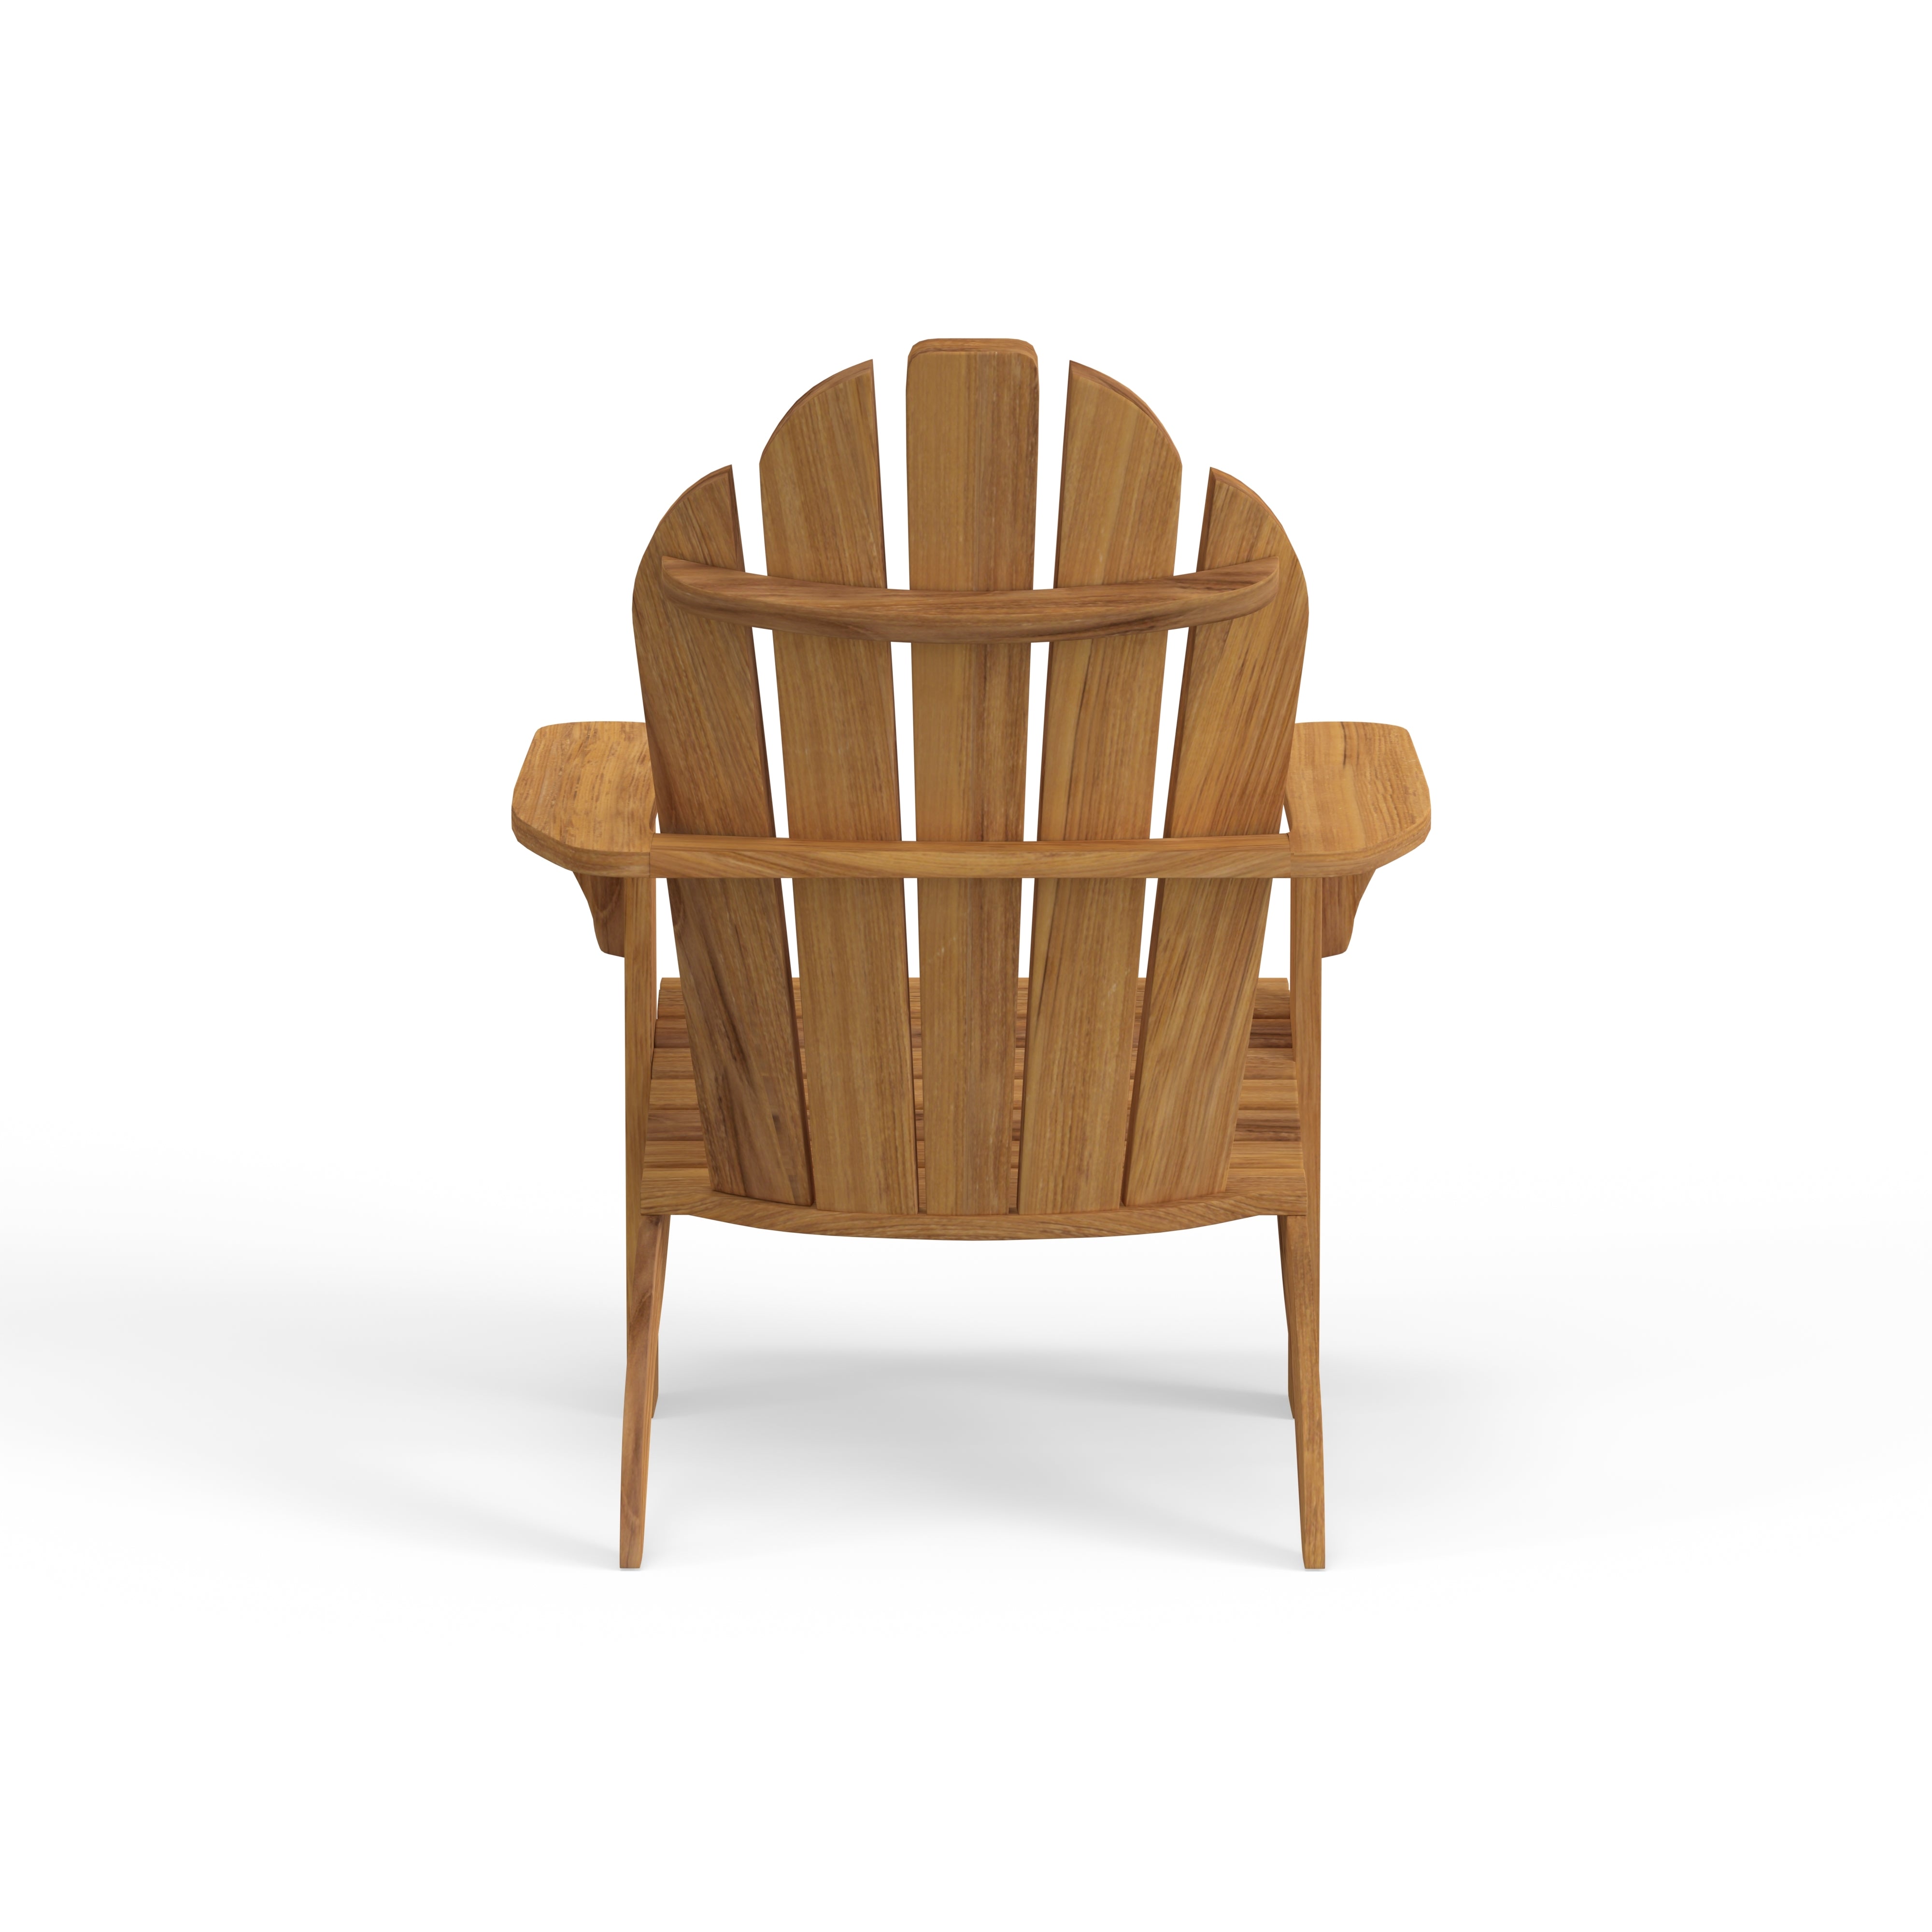 Handcrafted Best Teak Adirondack That Will Last Forever